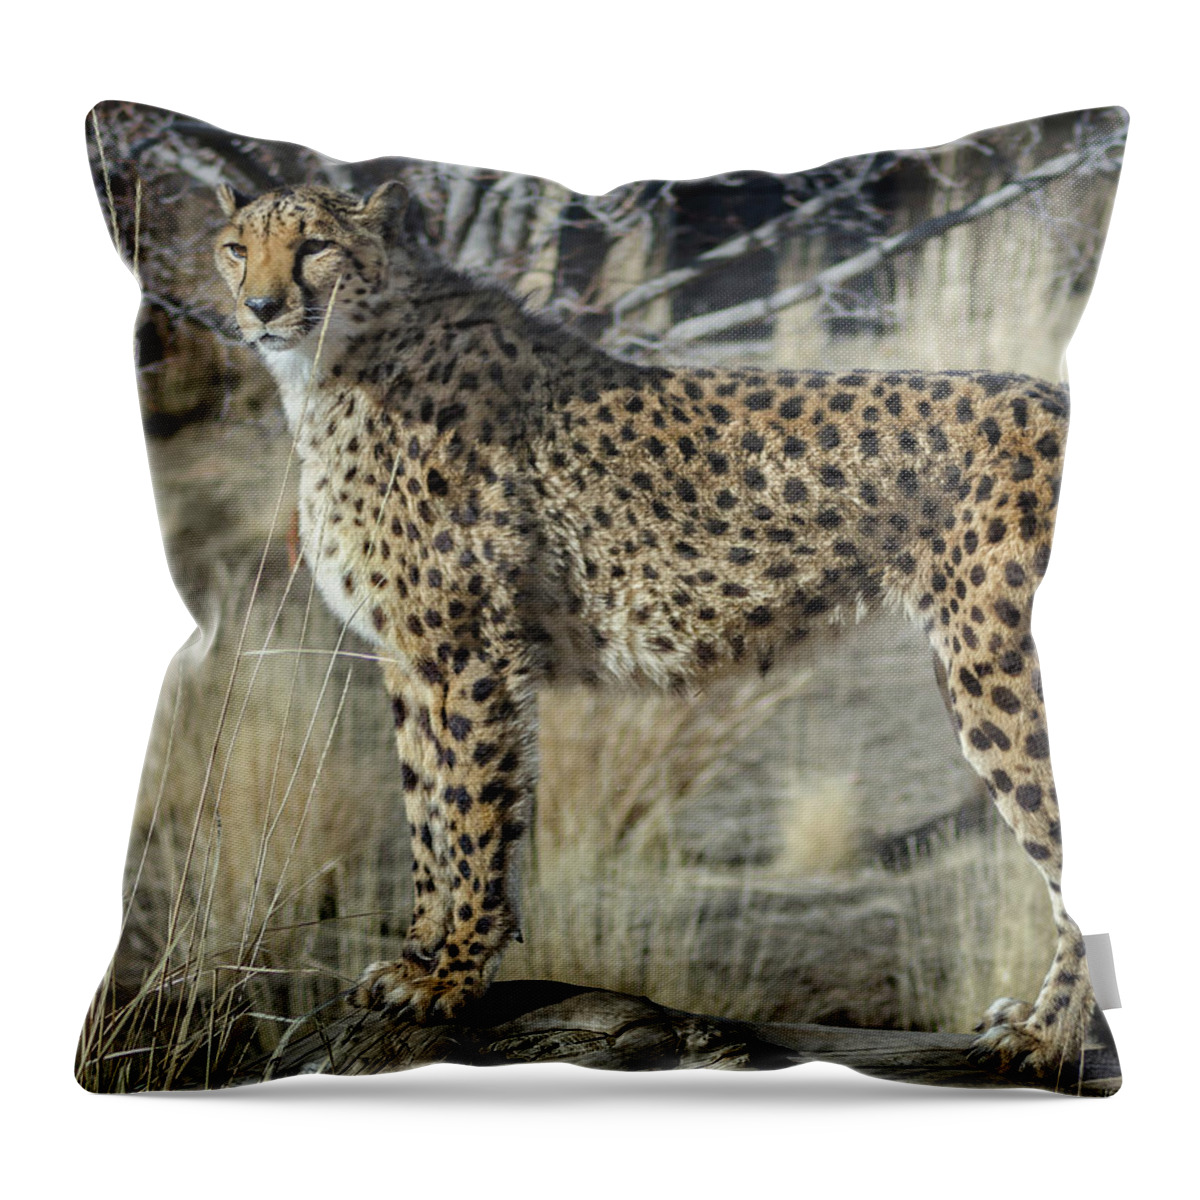 Animal Ark Throw Pillow featuring the photograph Cheetah by Rick Mosher